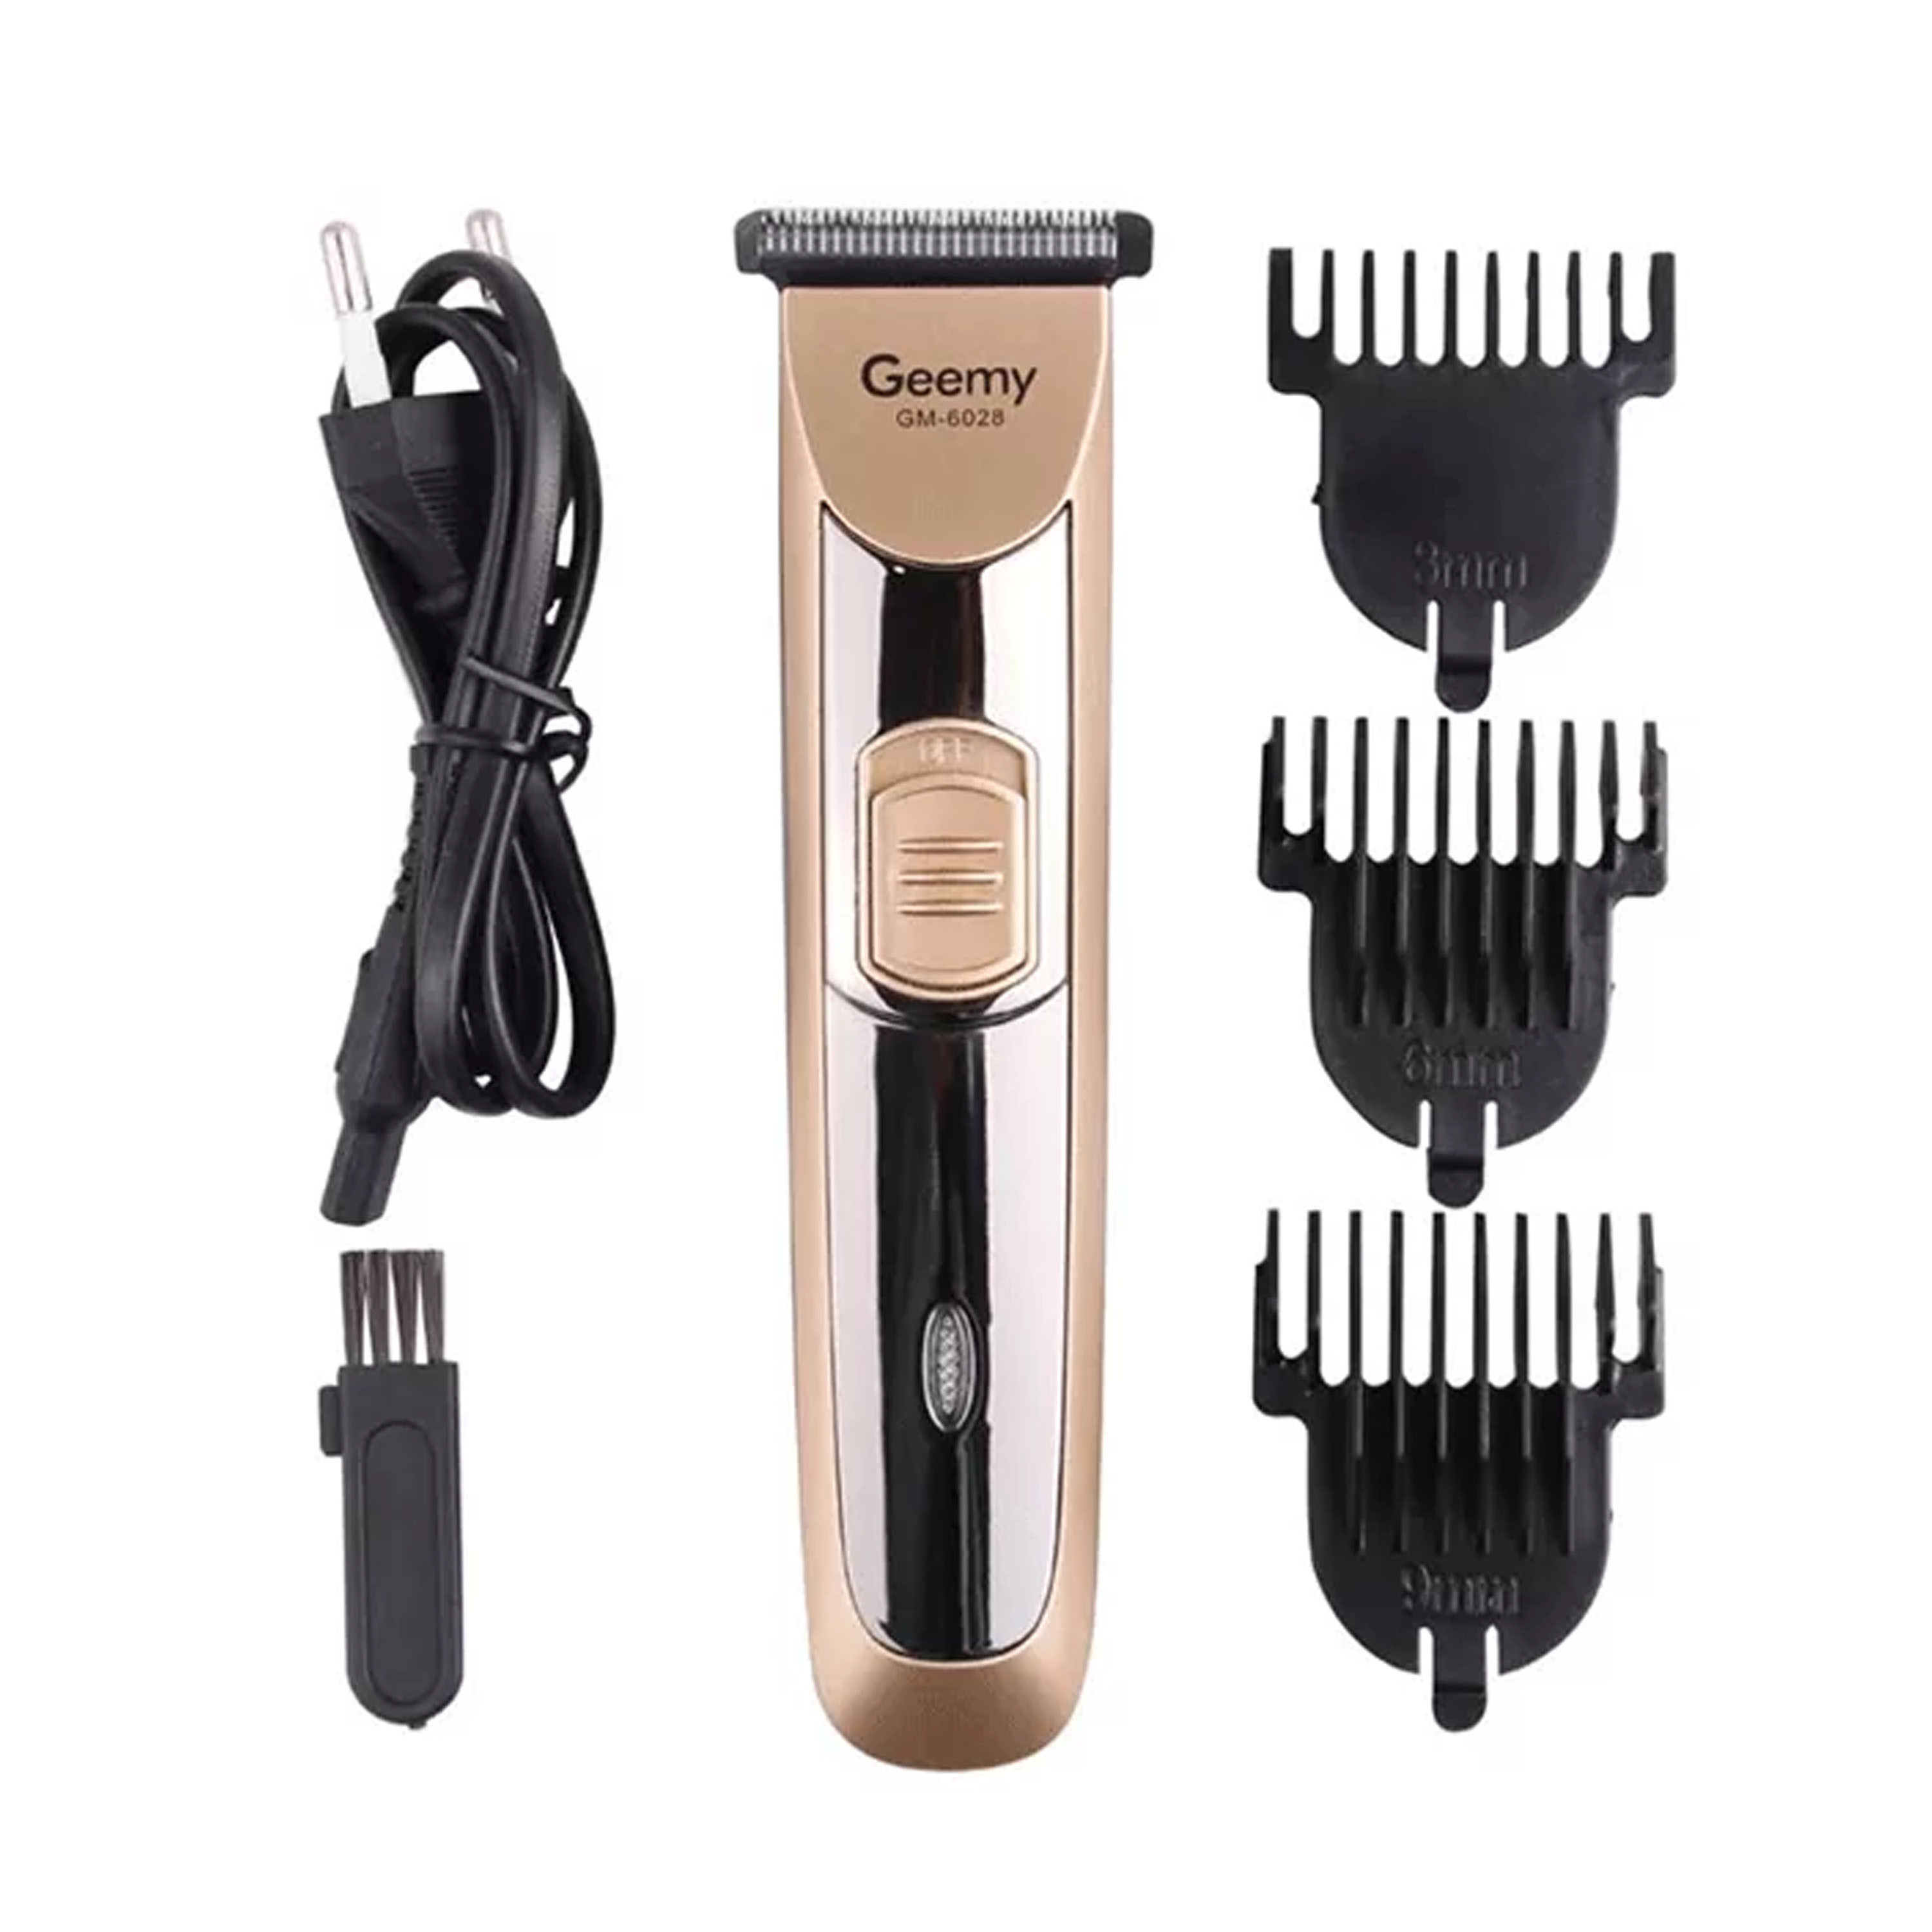 Rechargeable Hair Trimmer Geemy GM 6028